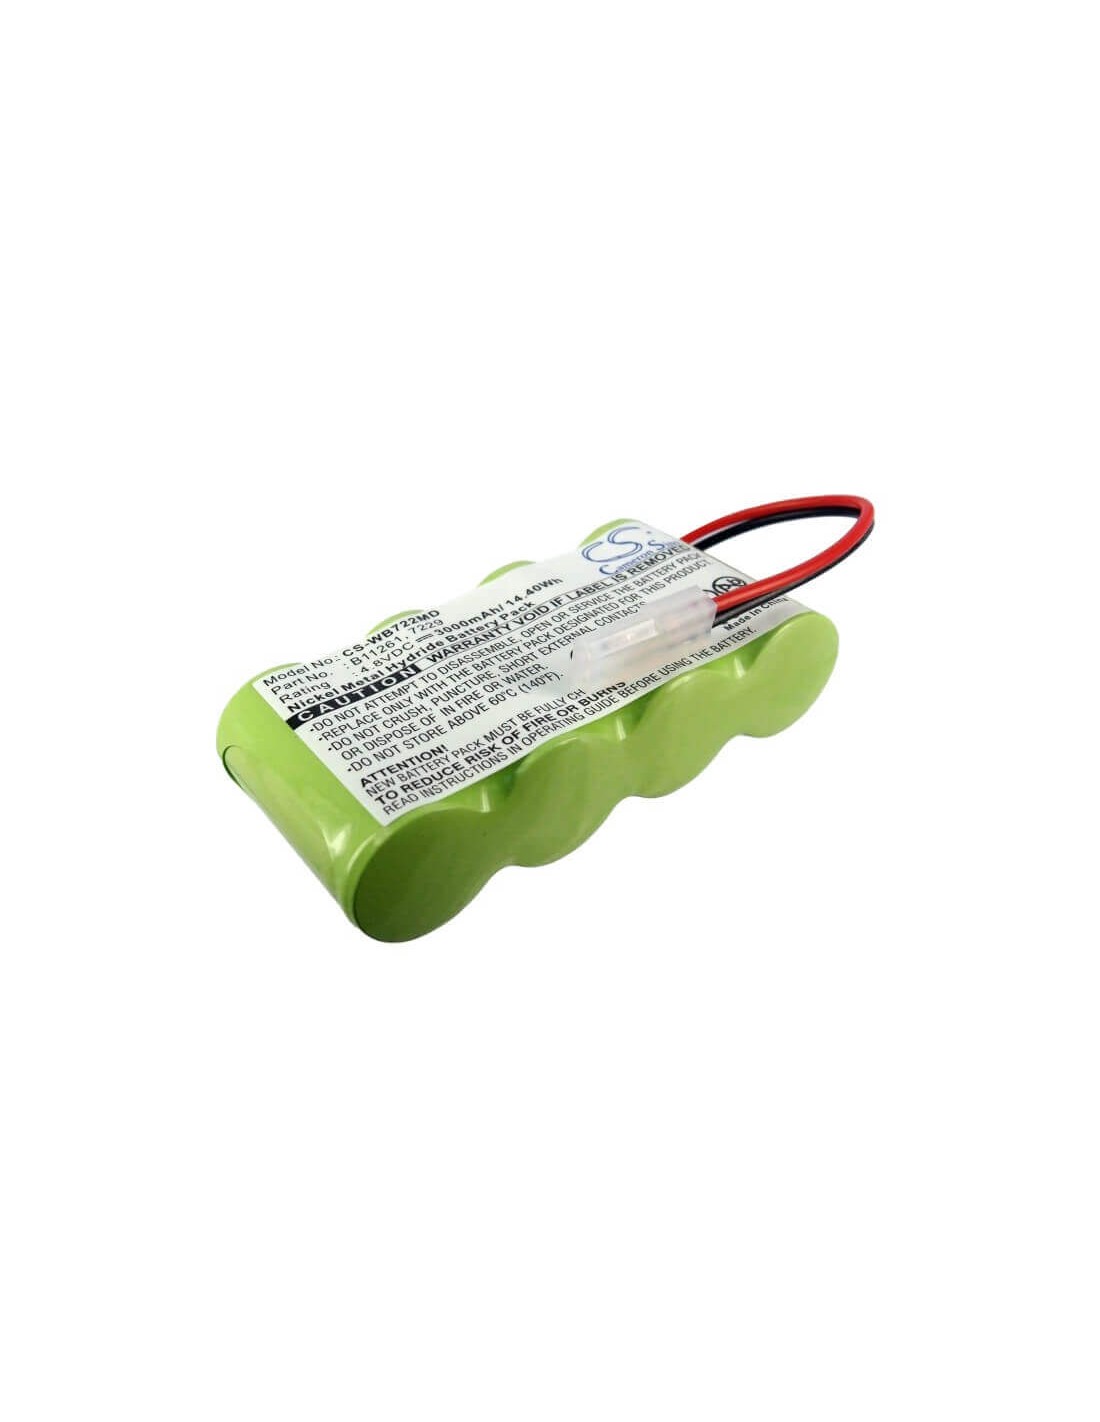 Battery for Welch-allyn 72240, 12000 4.8V, 3000mAh - 14.40Wh